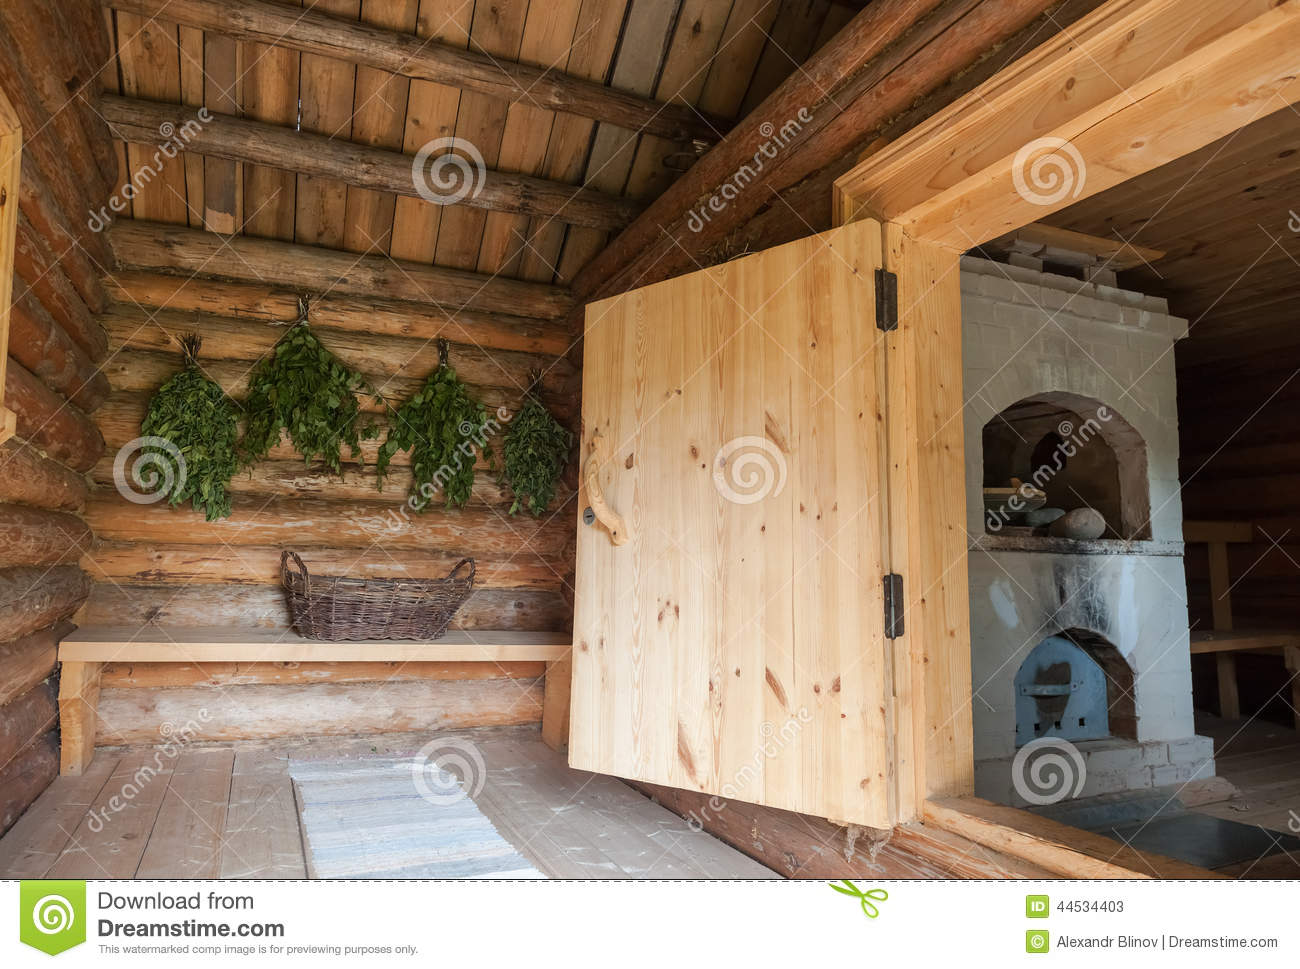 Birch Brooms For A Steam Room In Russian Wooden Bath Stock Photo    